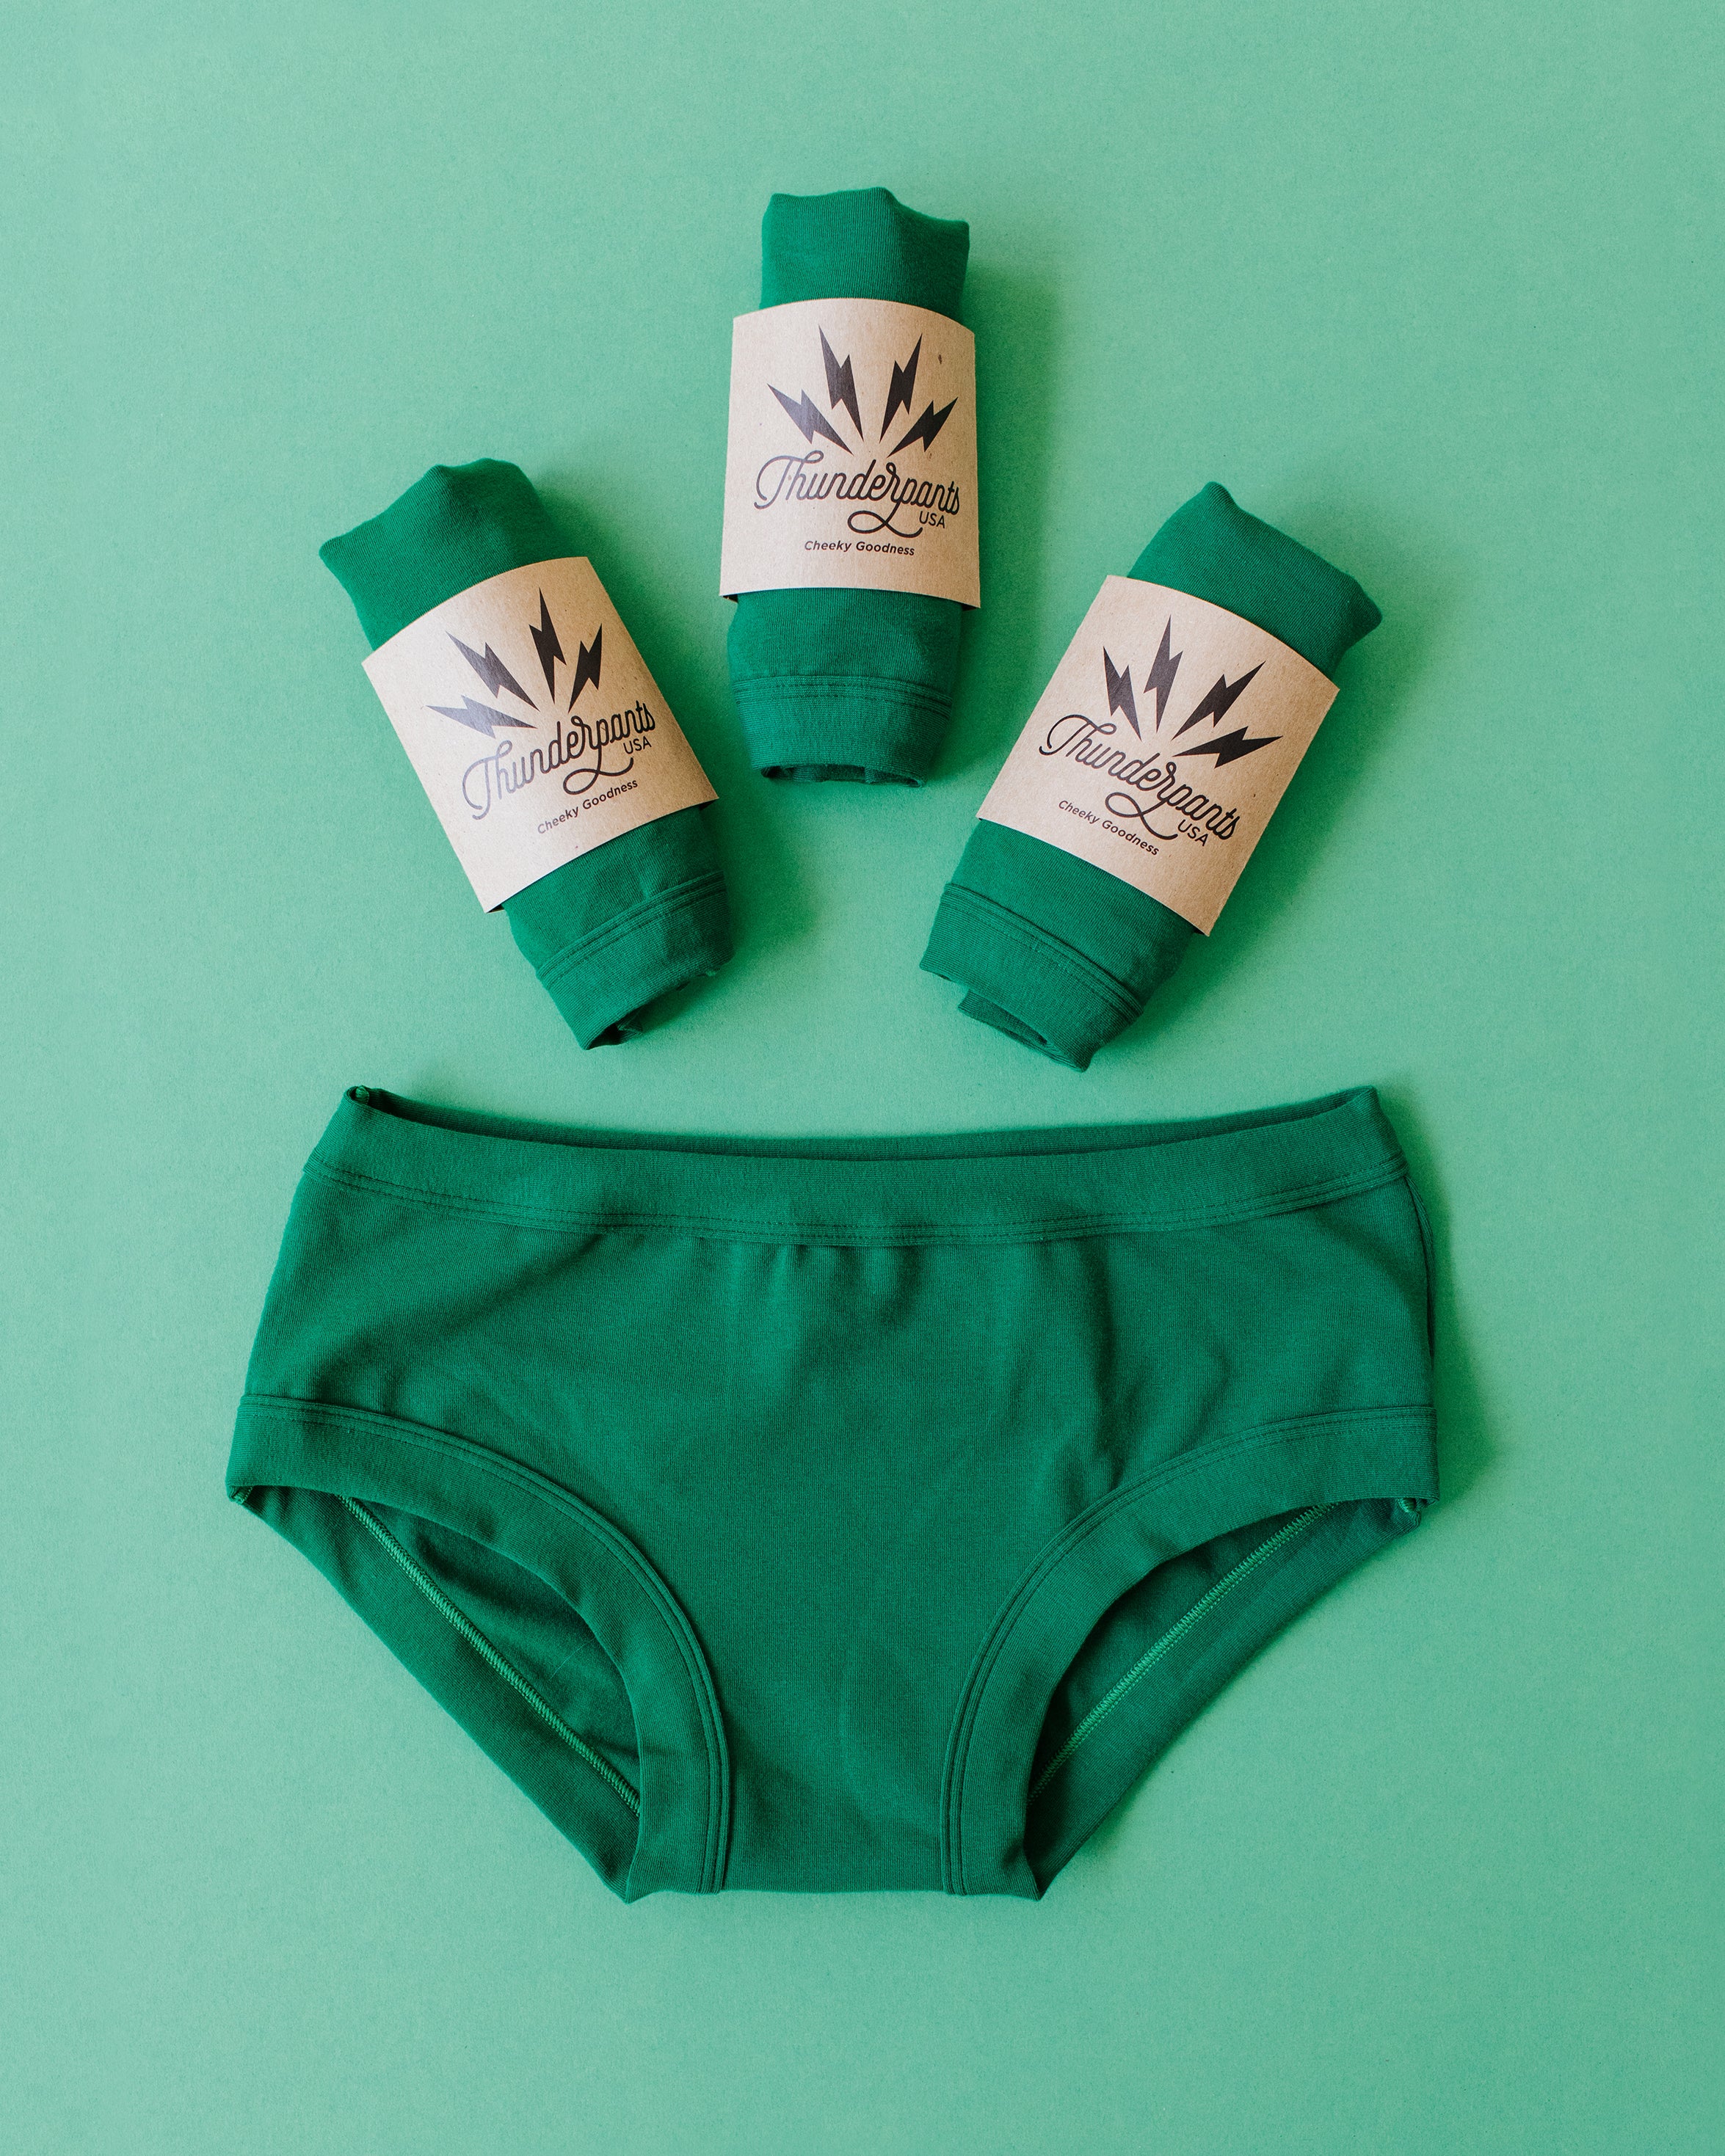 Flat lay of Thunderpants Hipster style underwear and three packaged undies in Emerald Green.